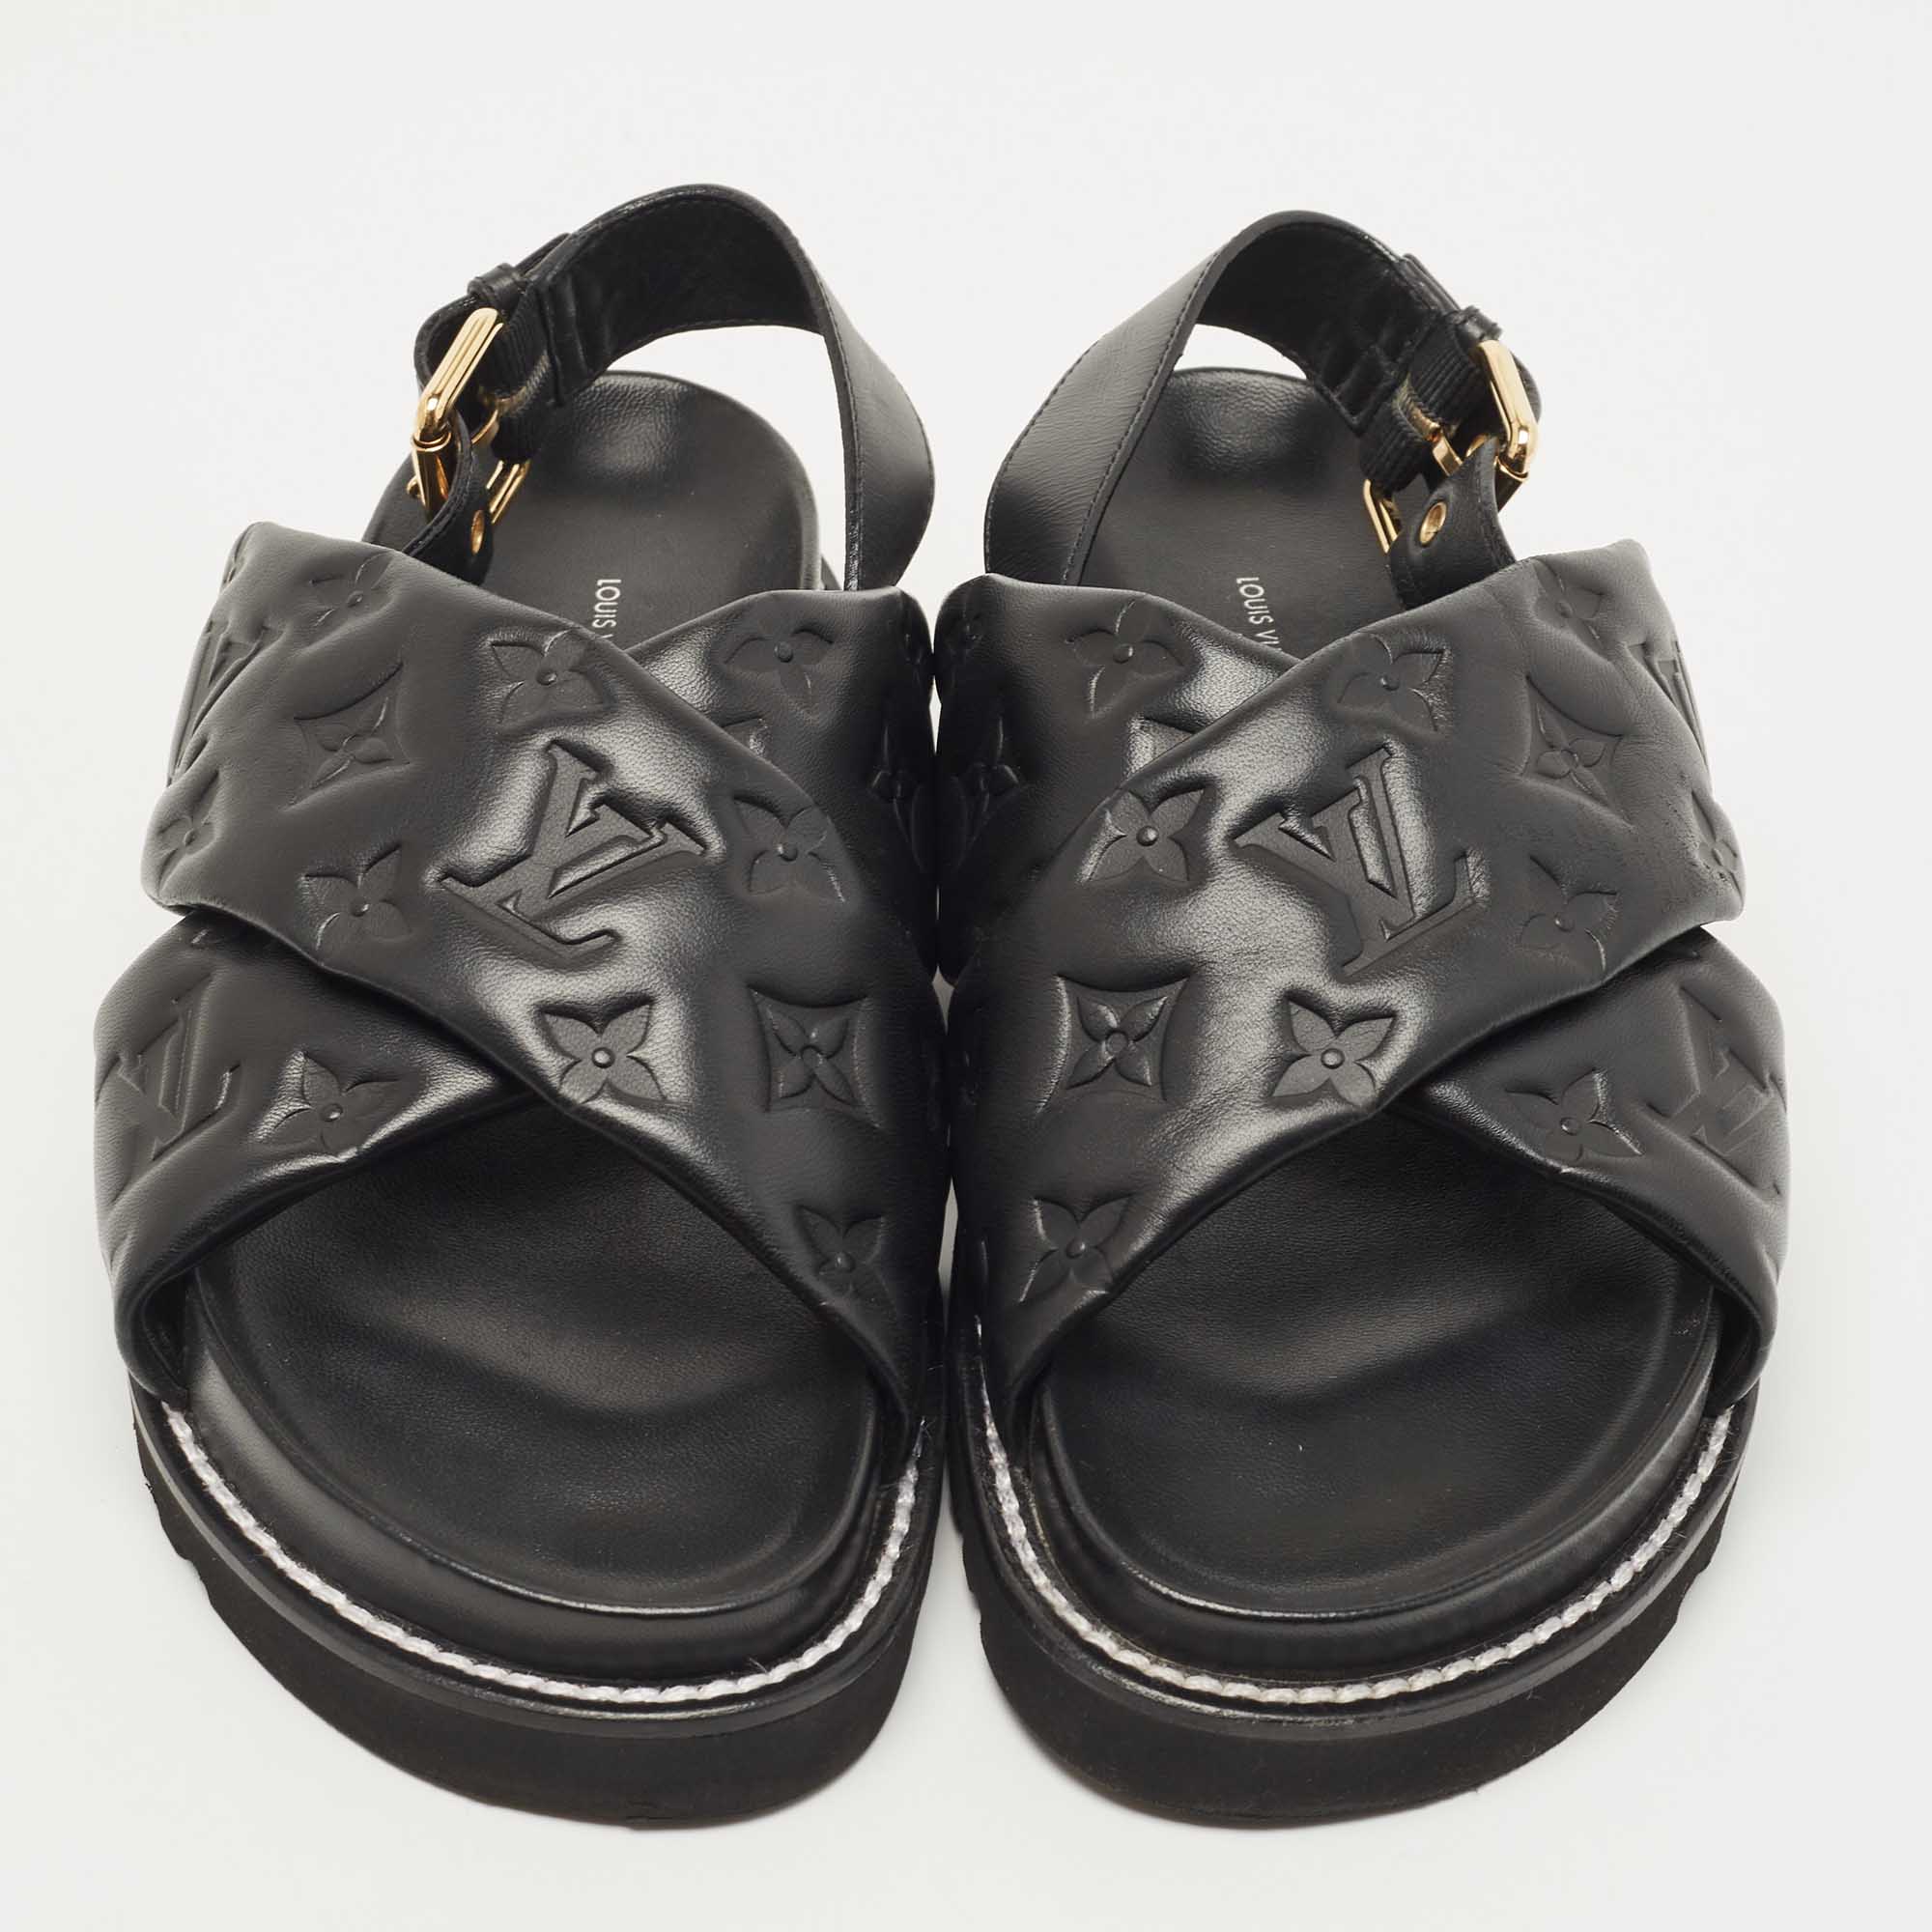 Louis Vuitton Black Monogram Embossed Leather Paseo Flat Sandals Size 39